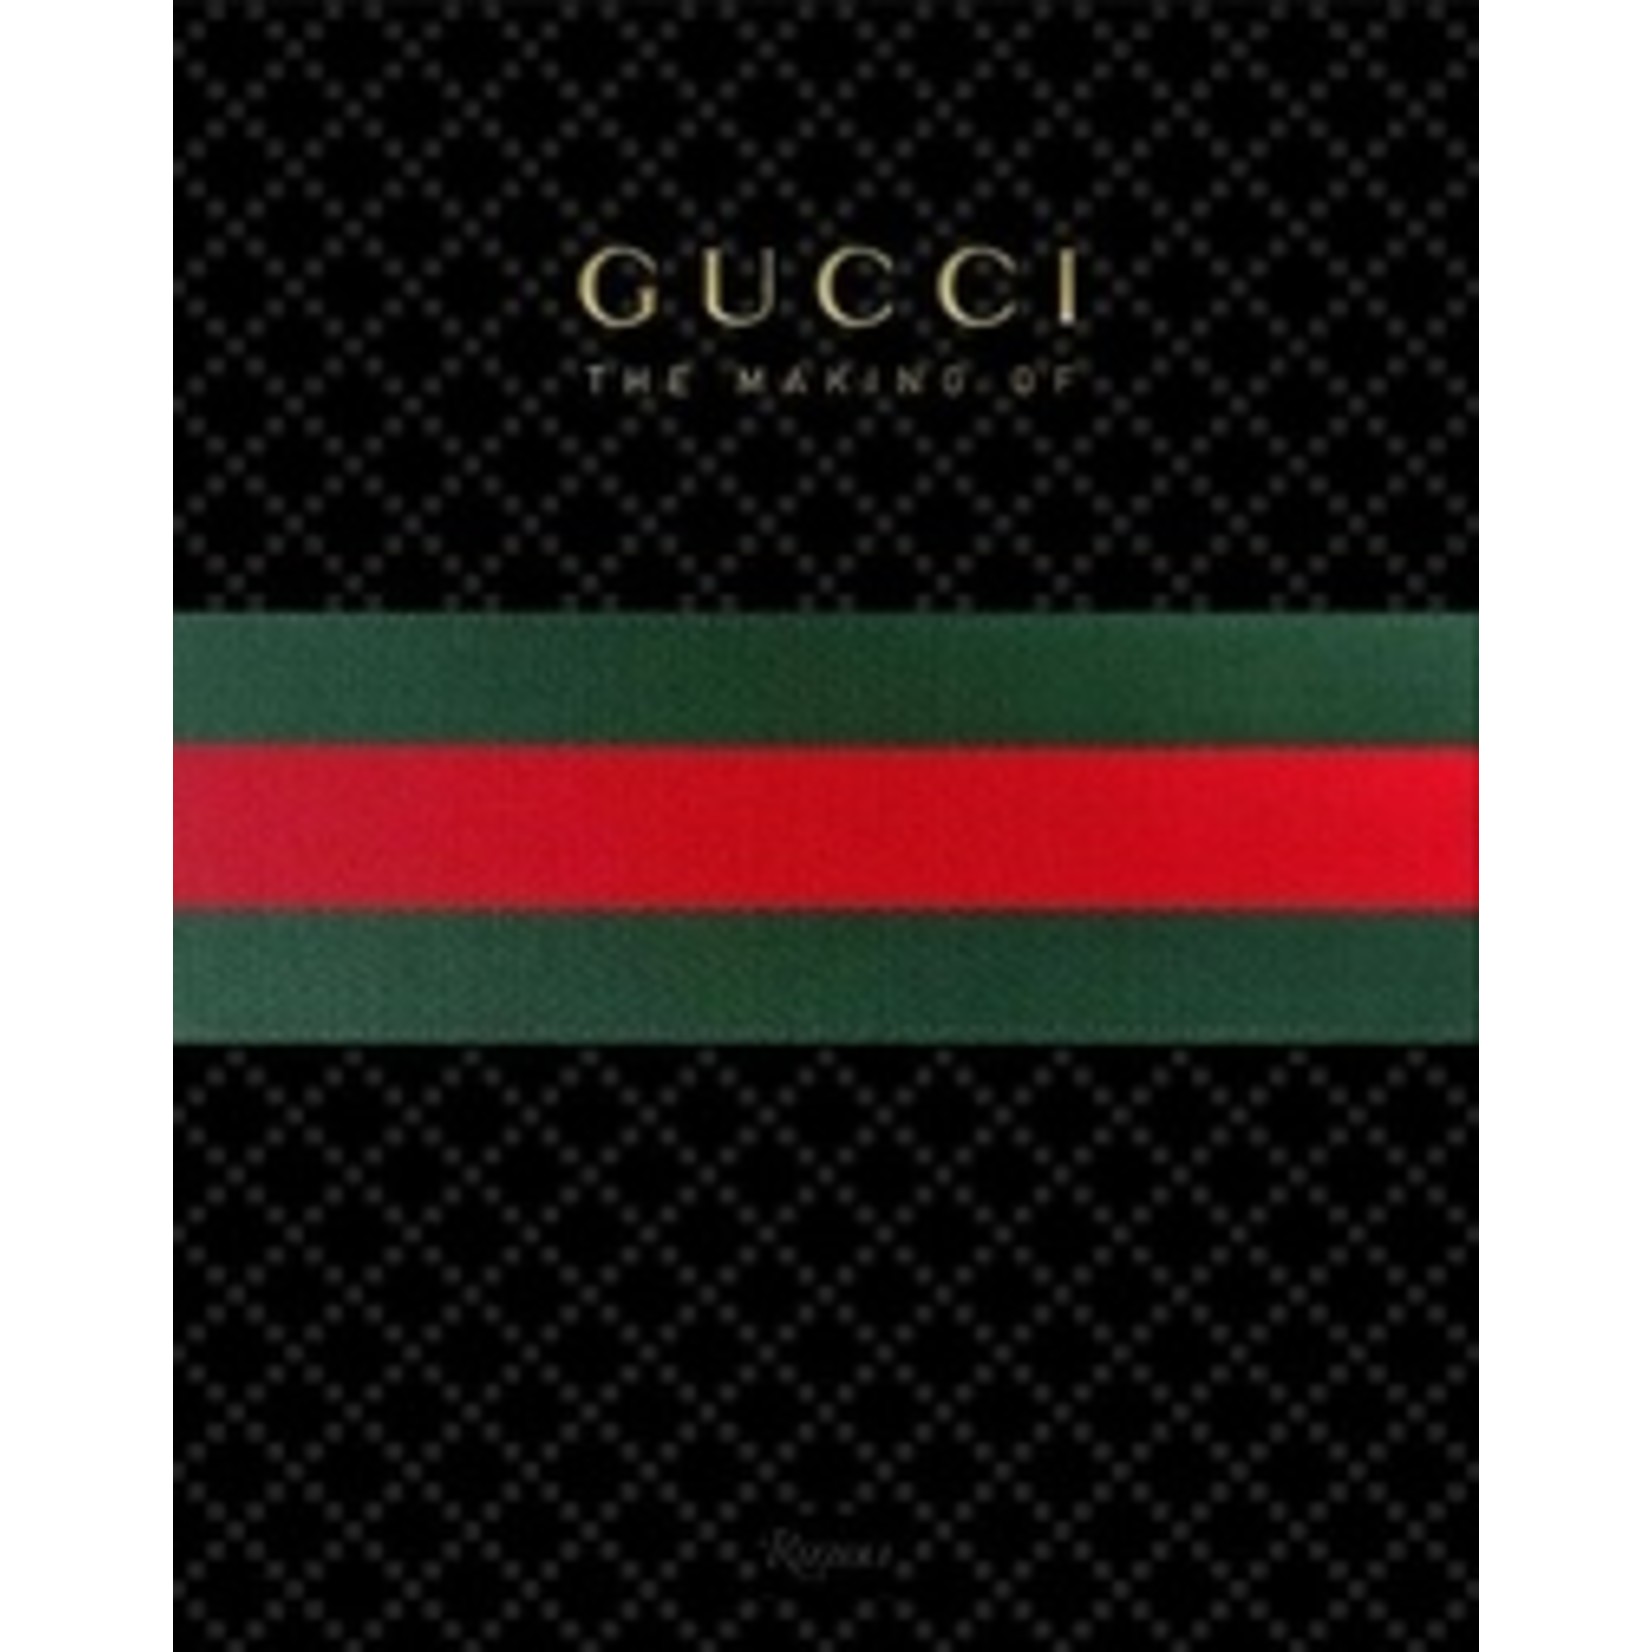 Penguin Random House Gucci: The Making Of